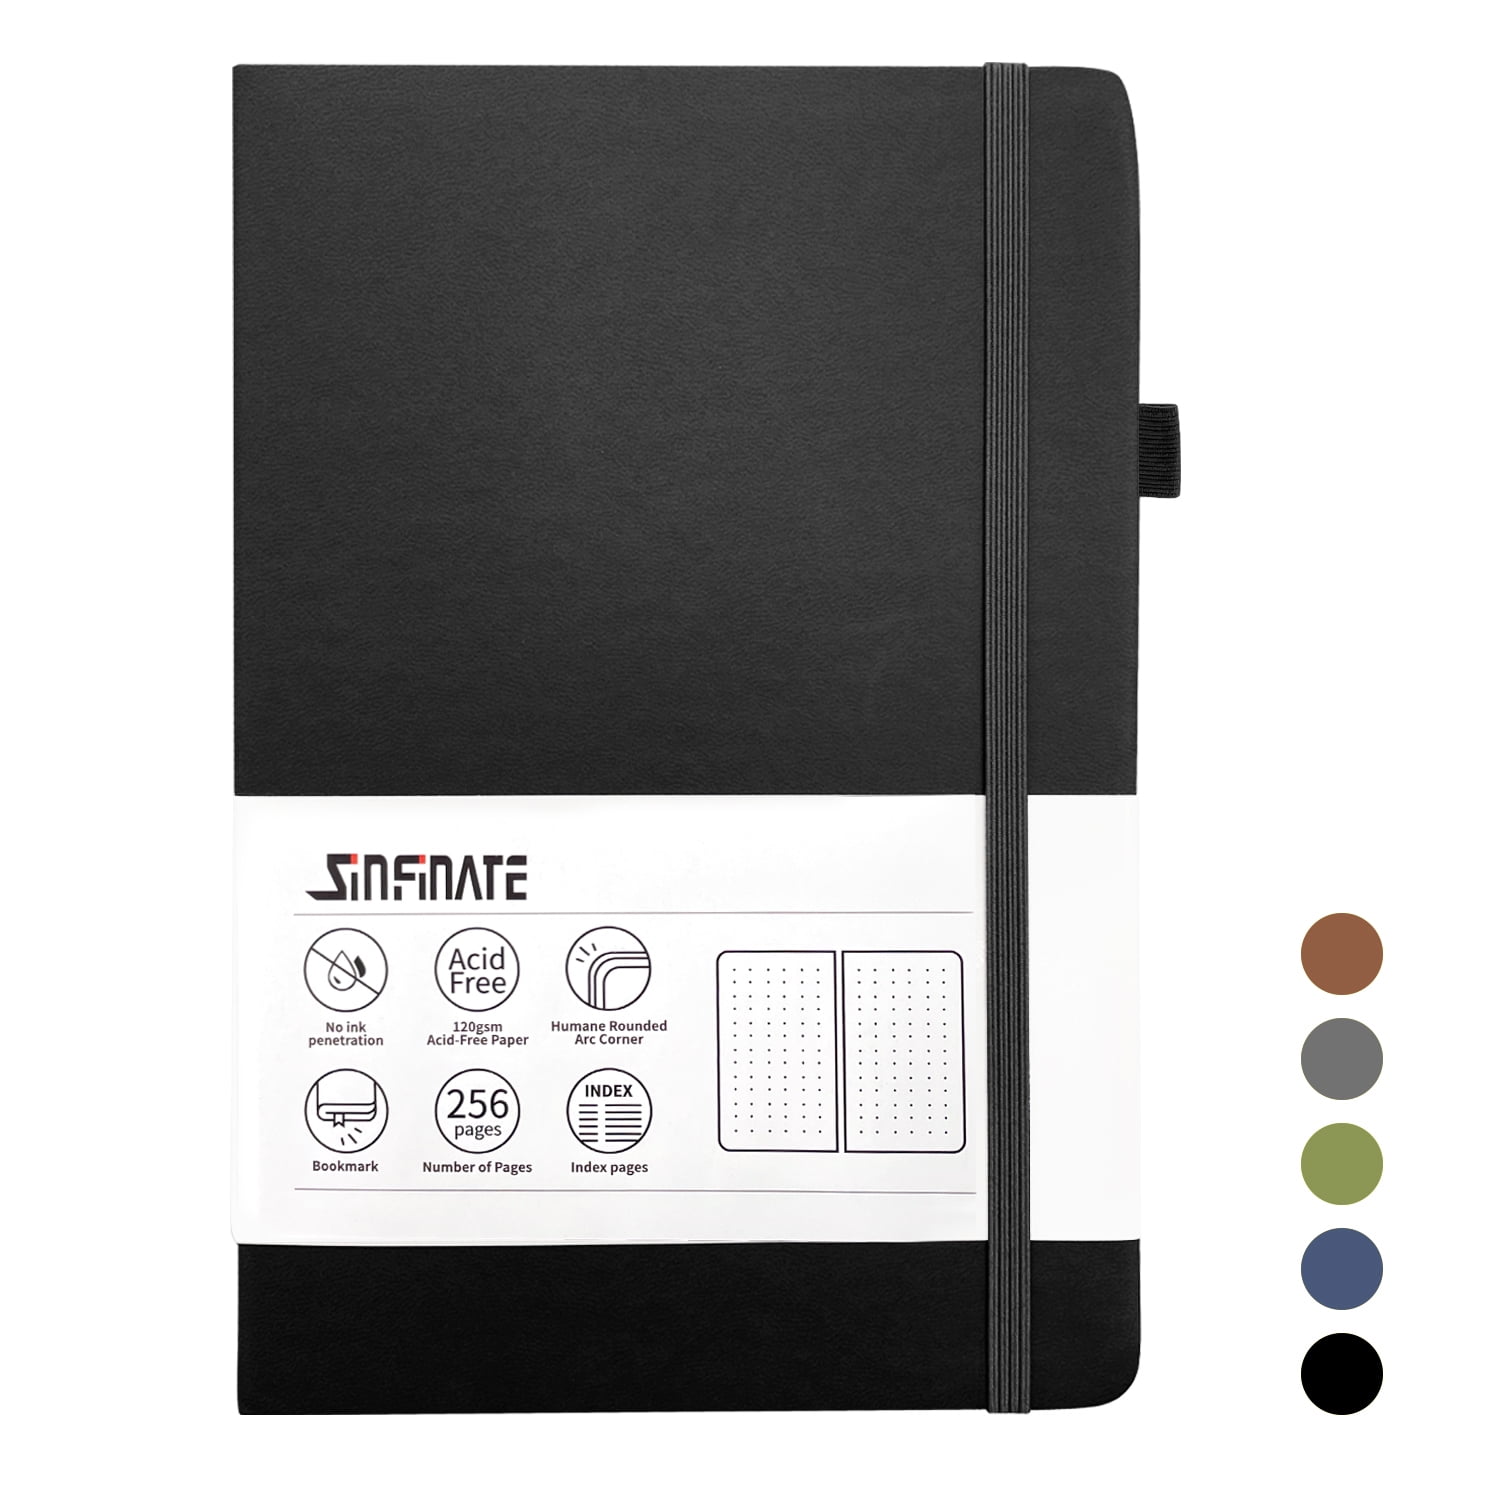 Black Pages Notebook with Black Cover, 256 Pages